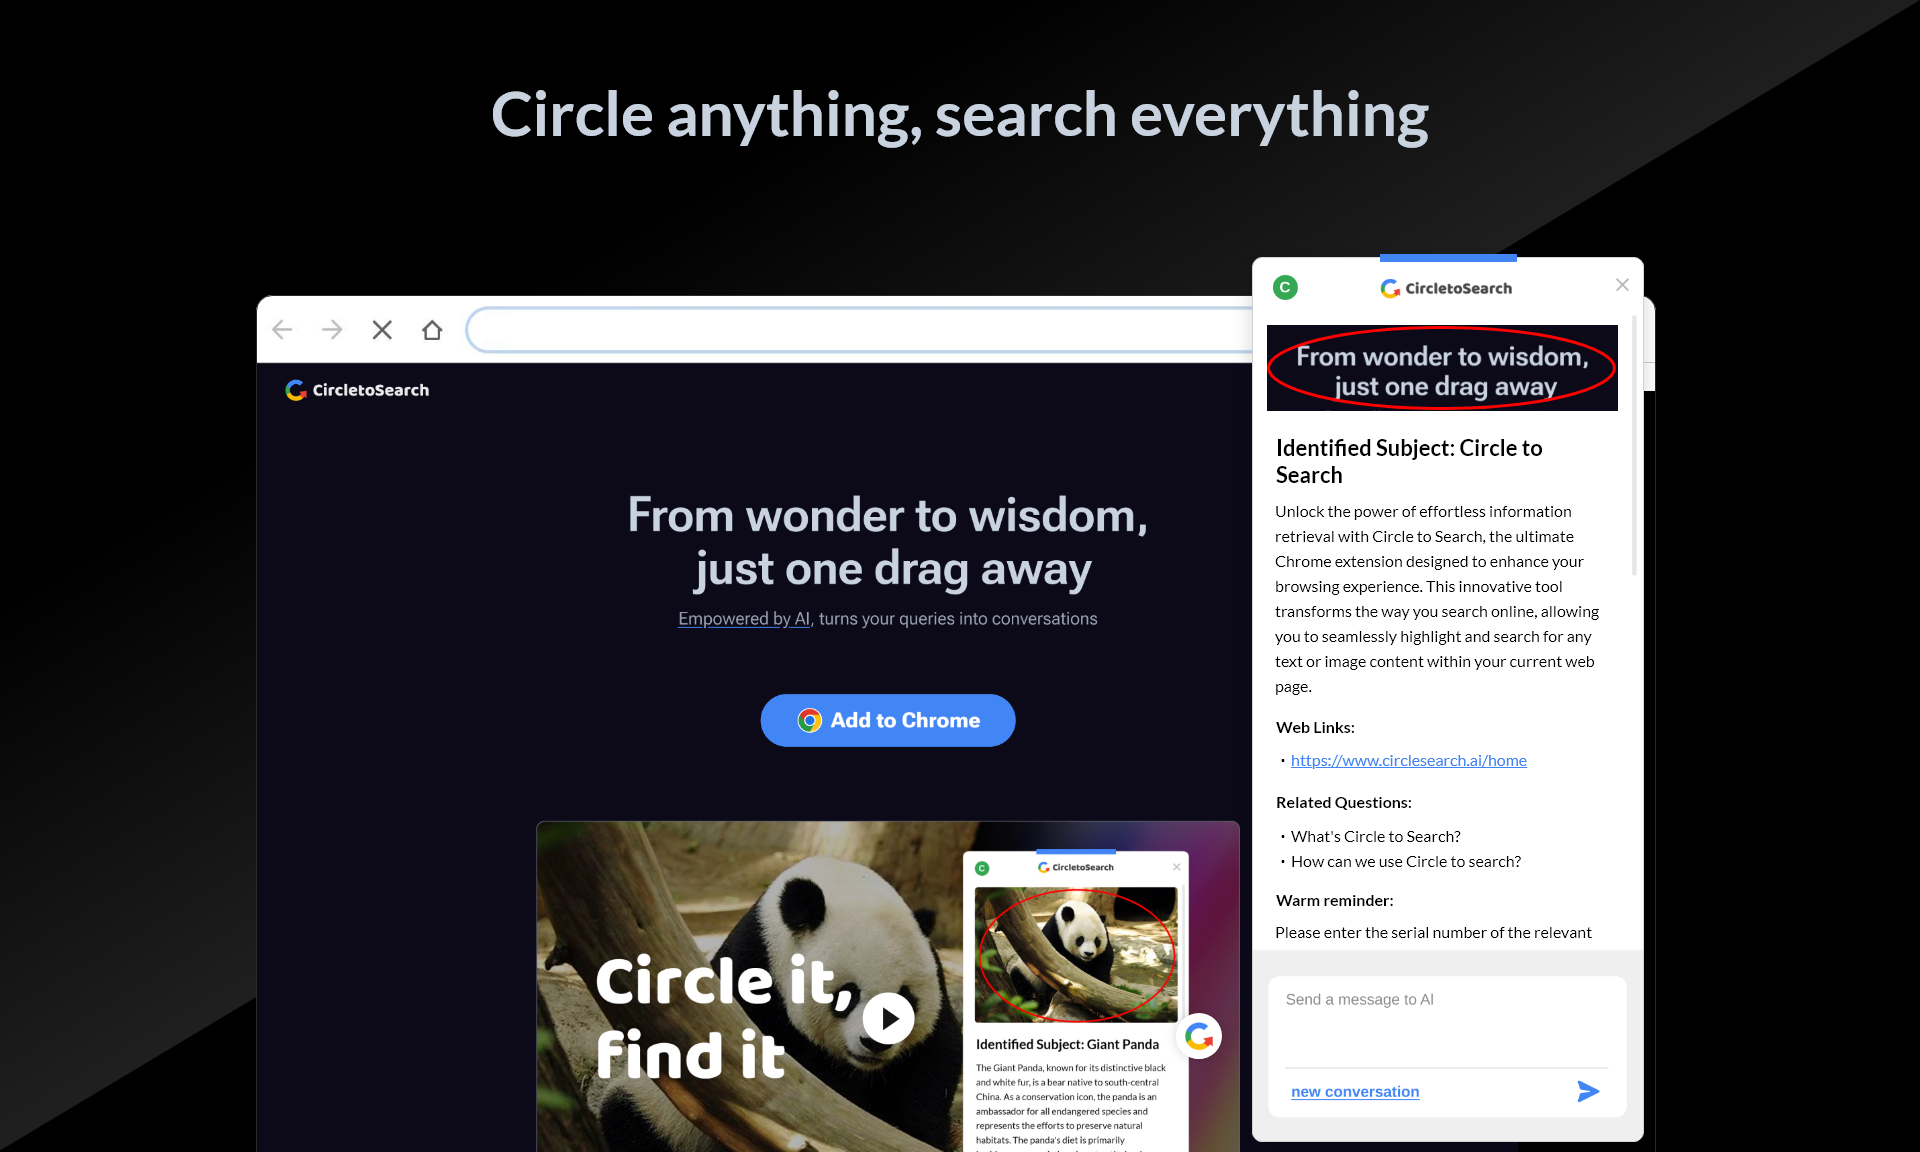 circle-to-search - From wonder to wisdom, just one drag away.